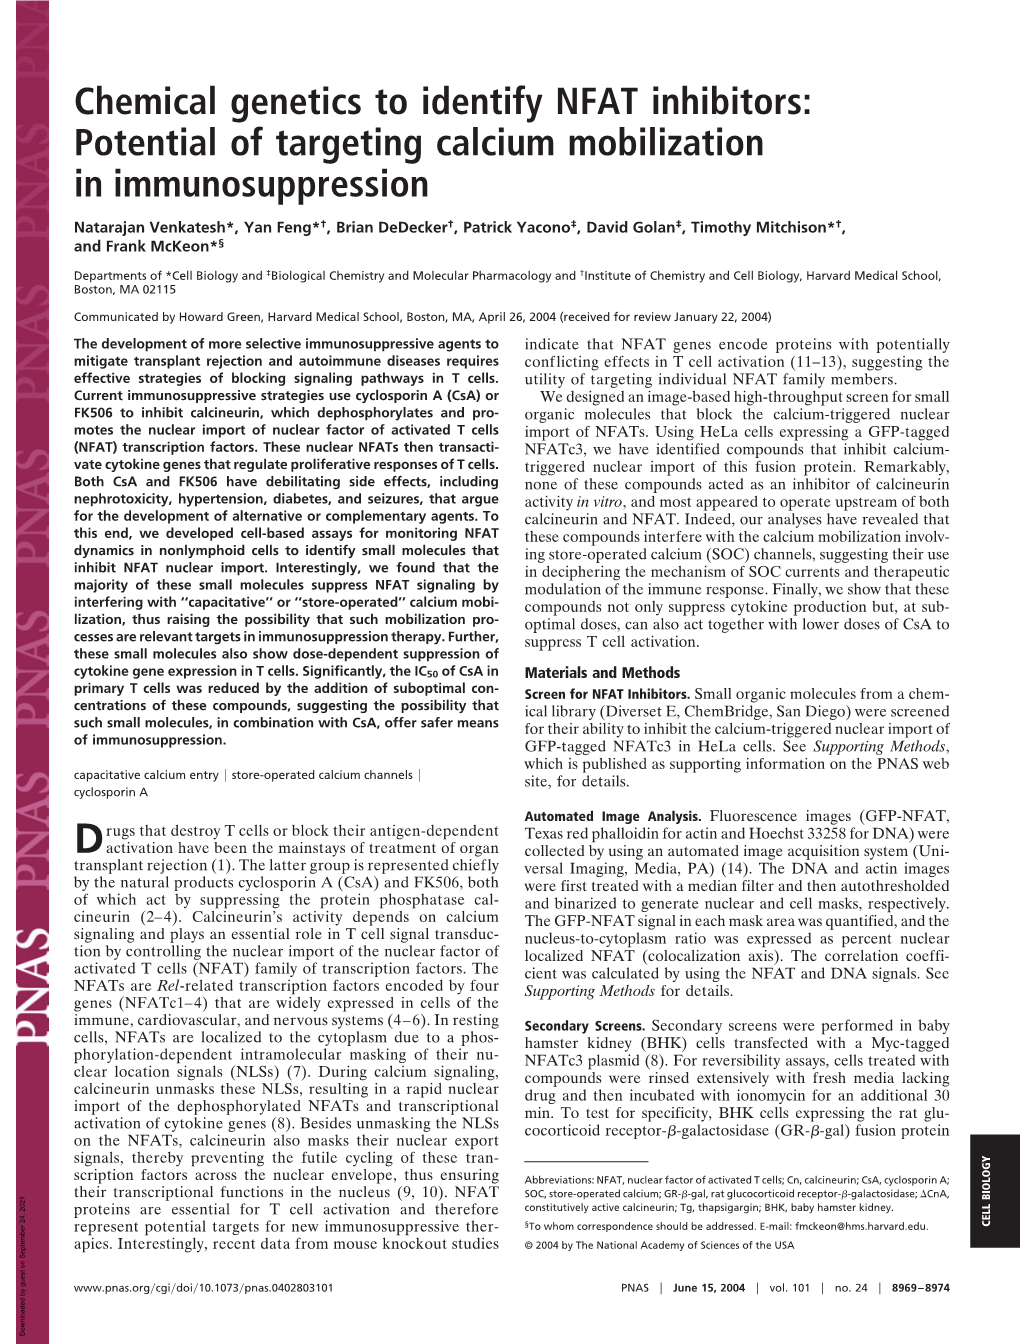 Chemical Genetics to Identify NFAT Inhibitors: Potential of Targeting Calcium Mobilization in Immunosuppression